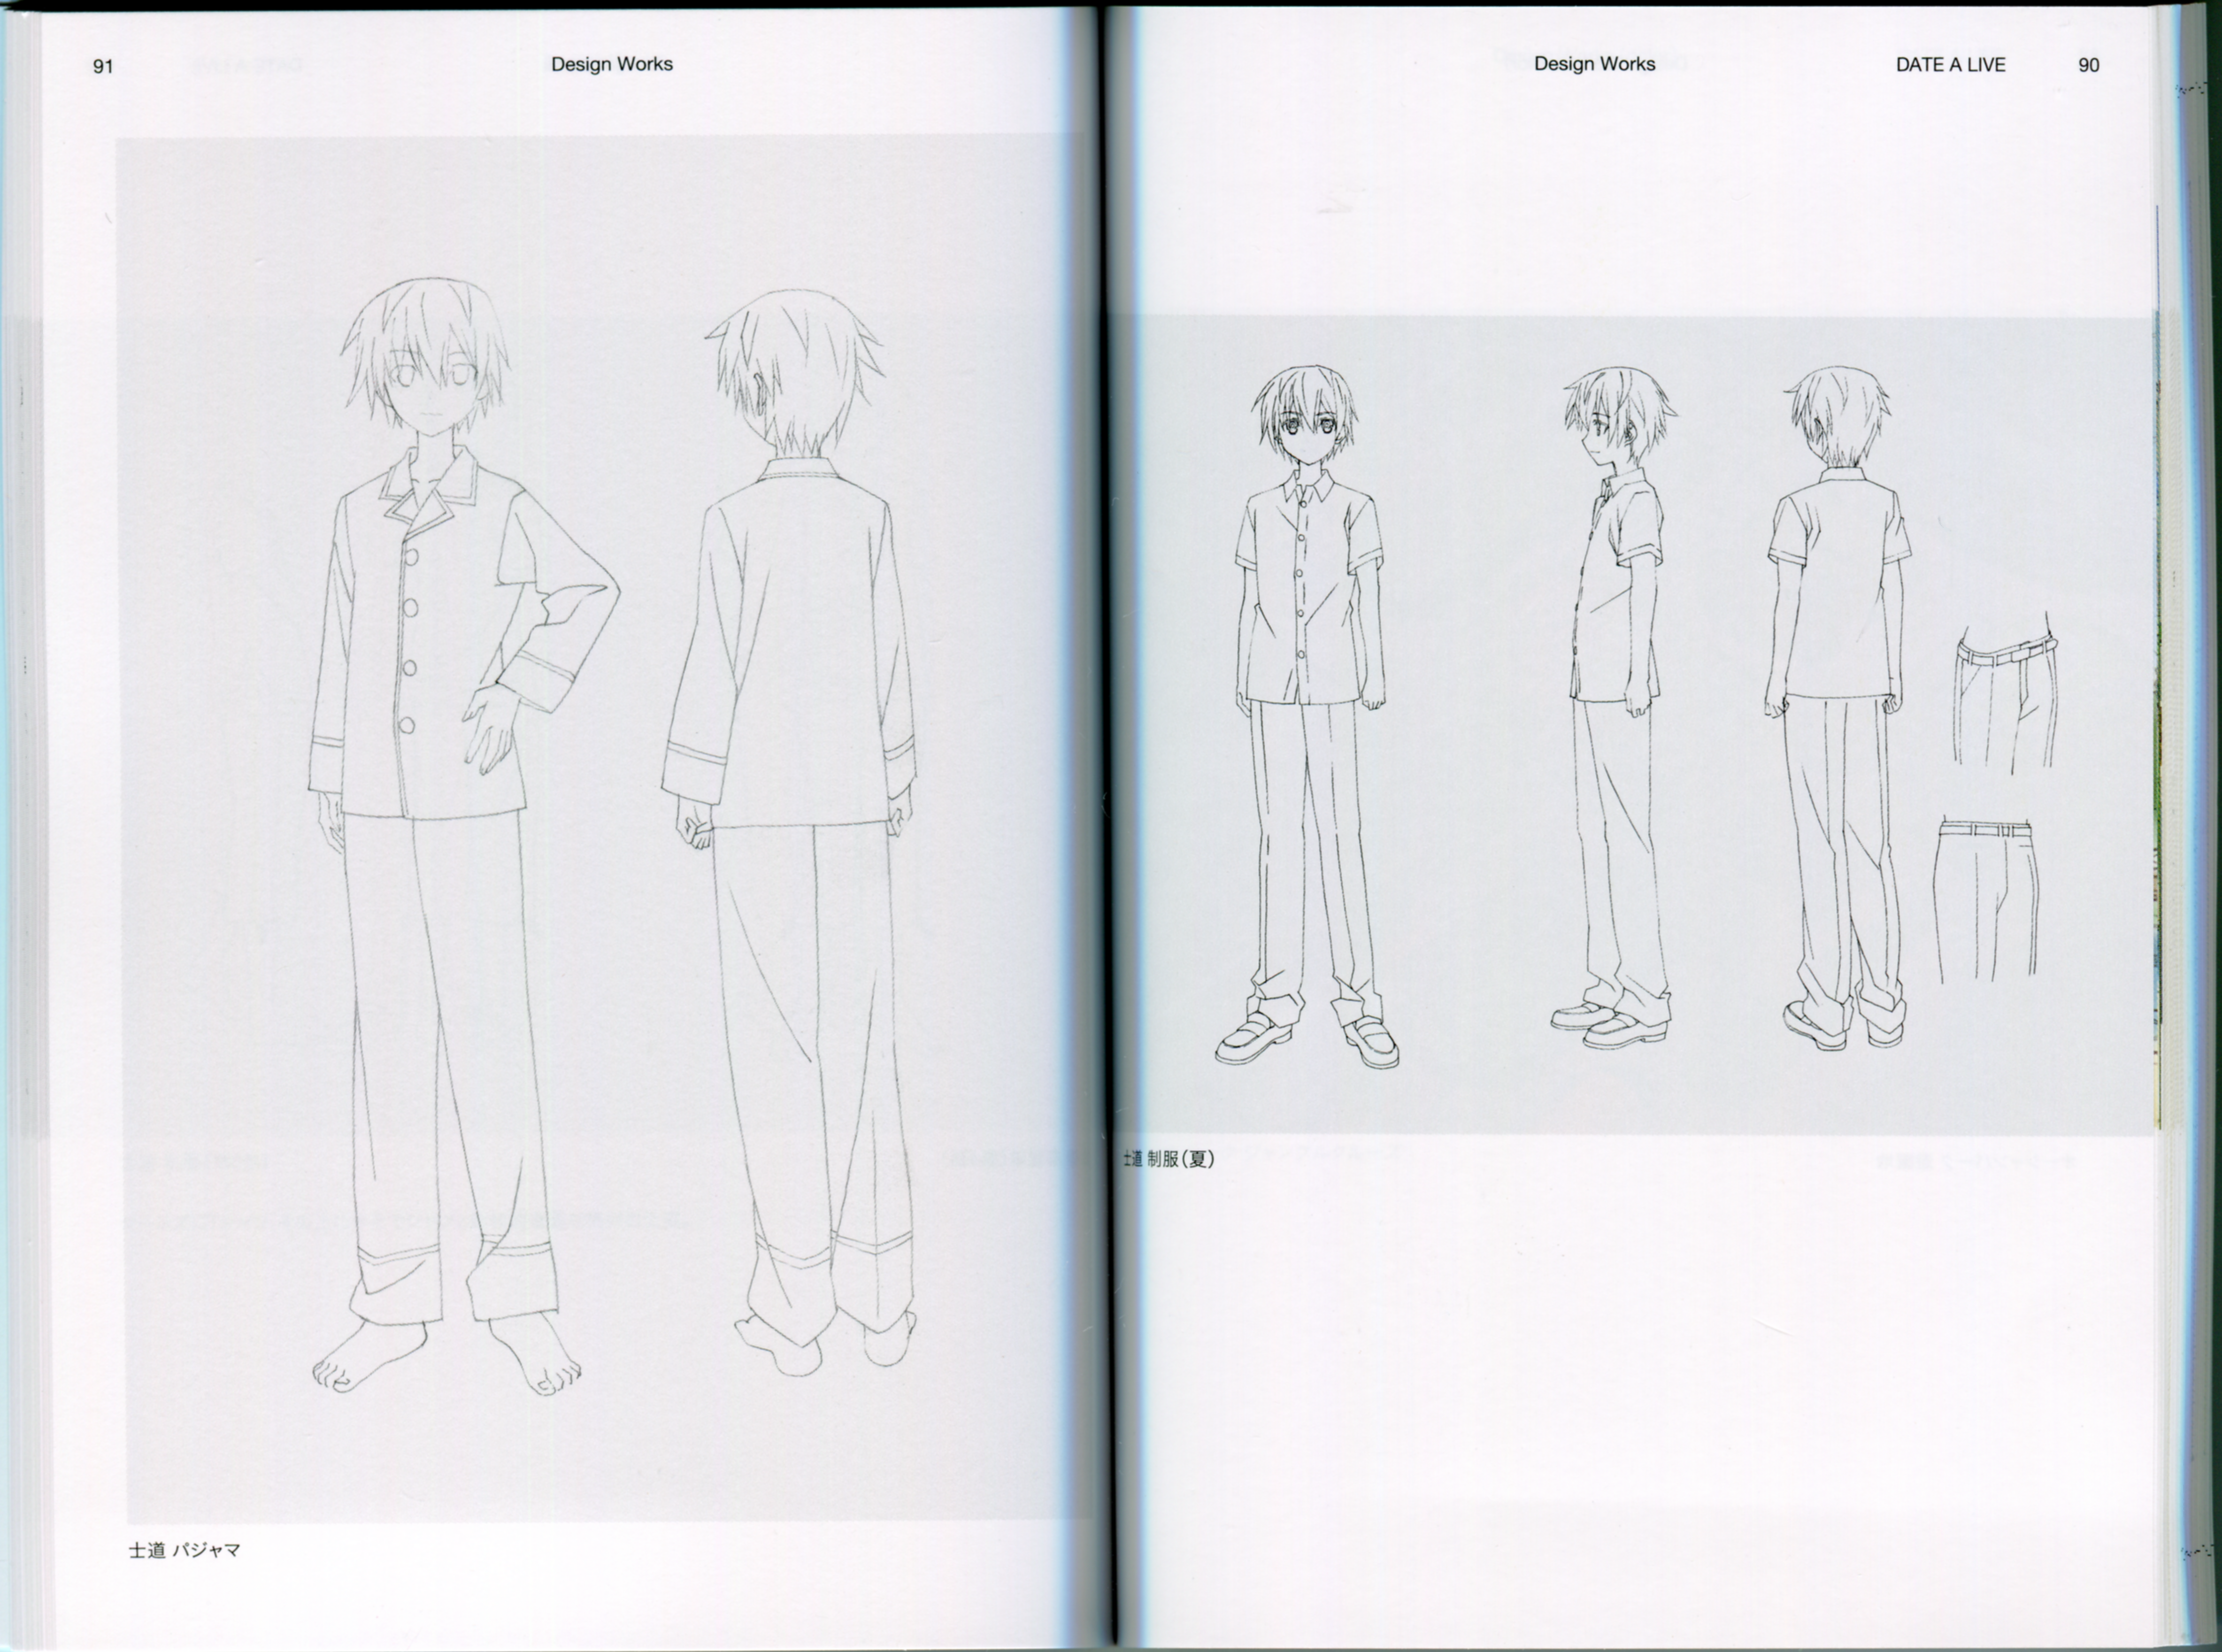 Booklet - P90-91.png